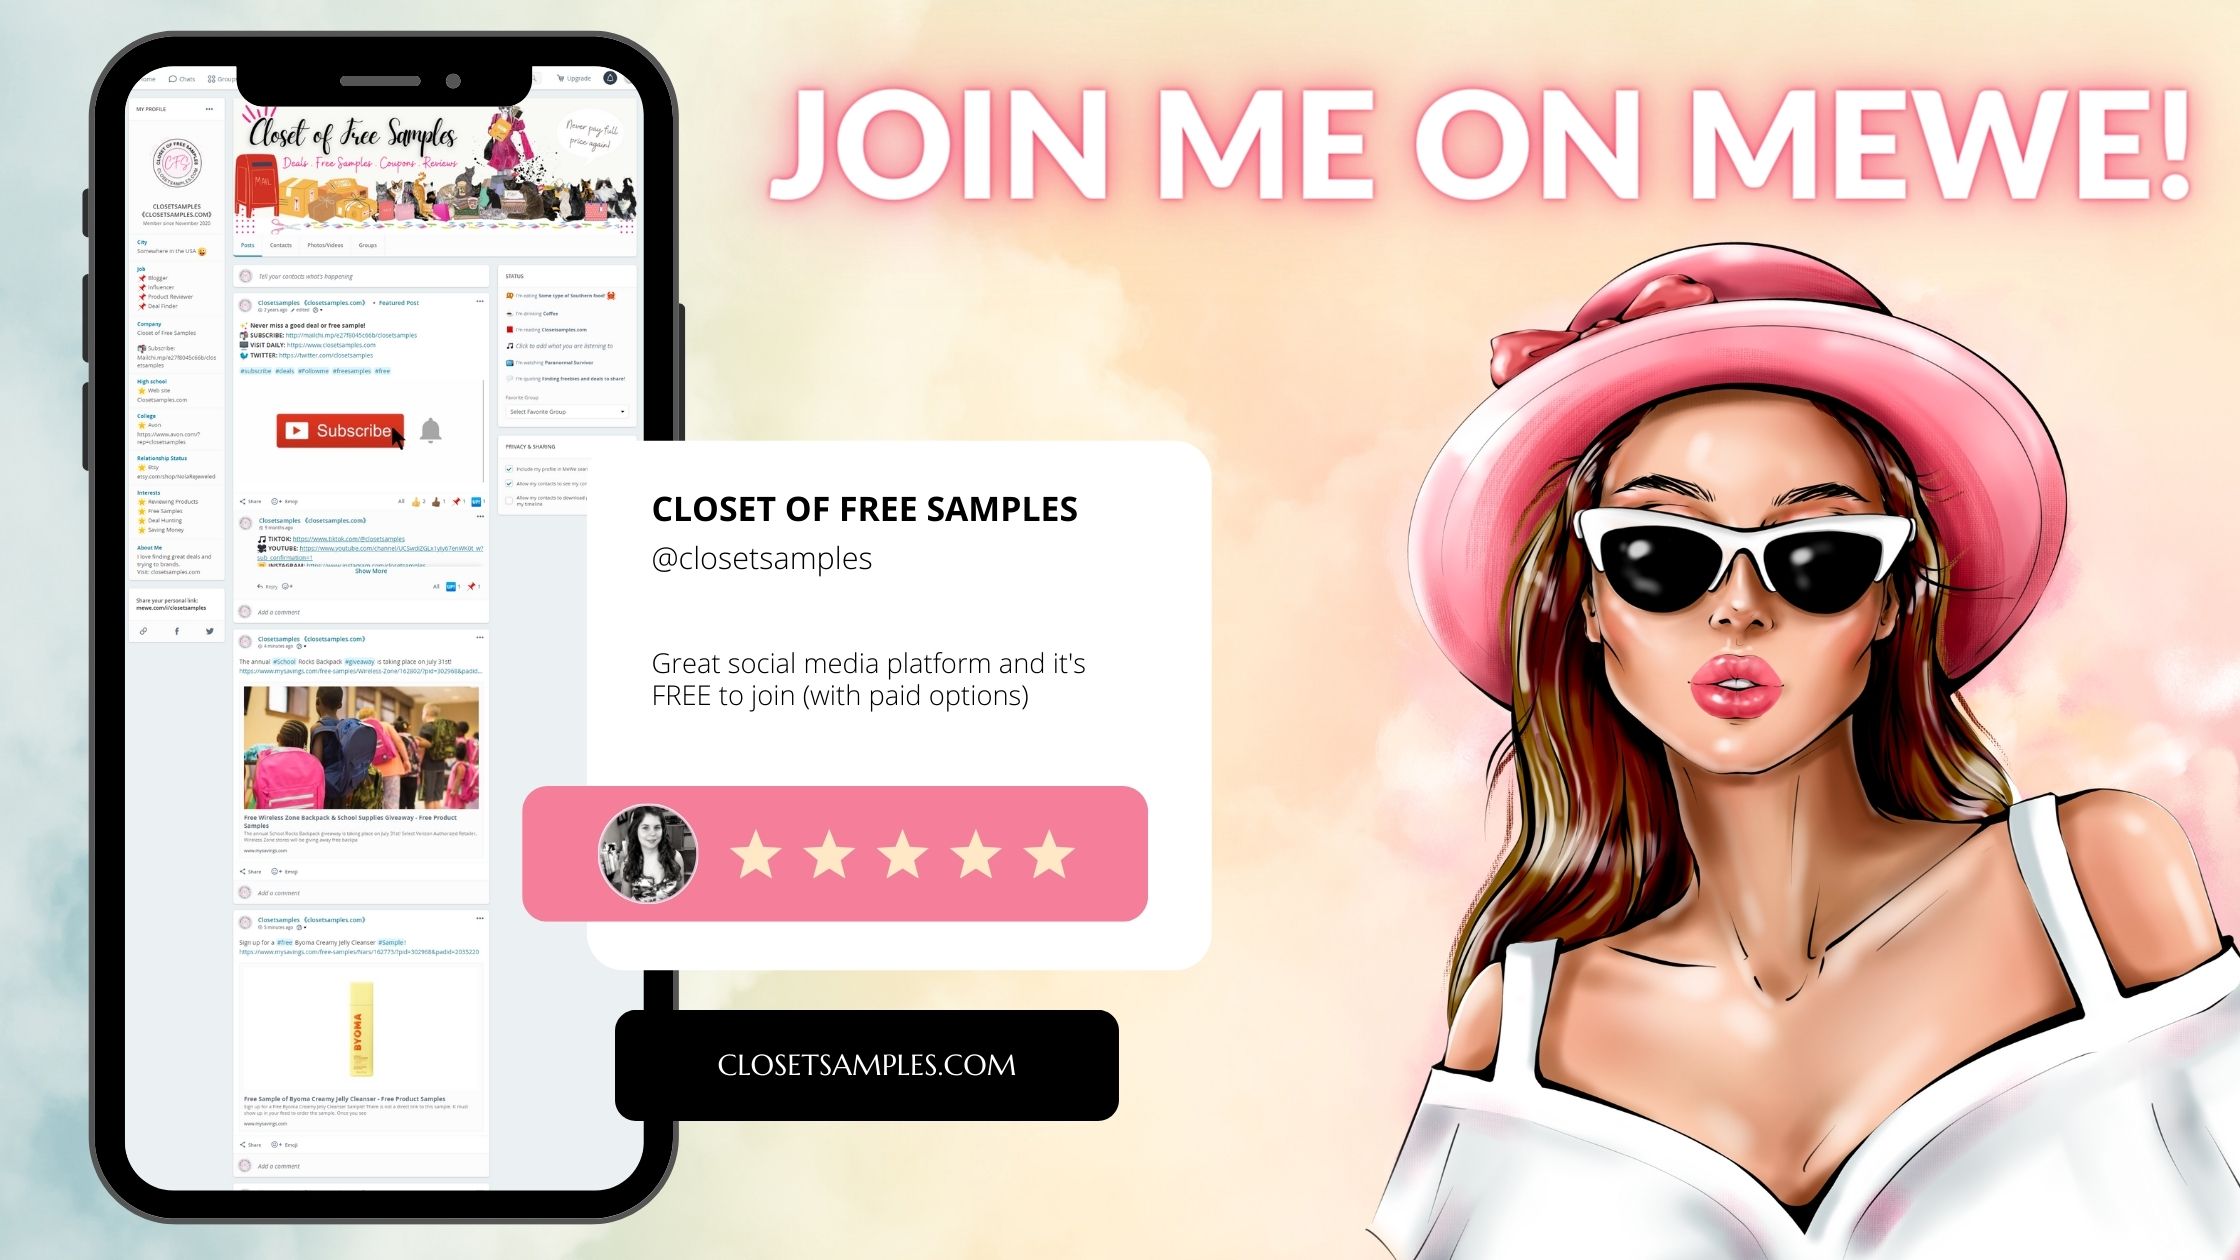 Join Closet of Free Samples on MeWe!